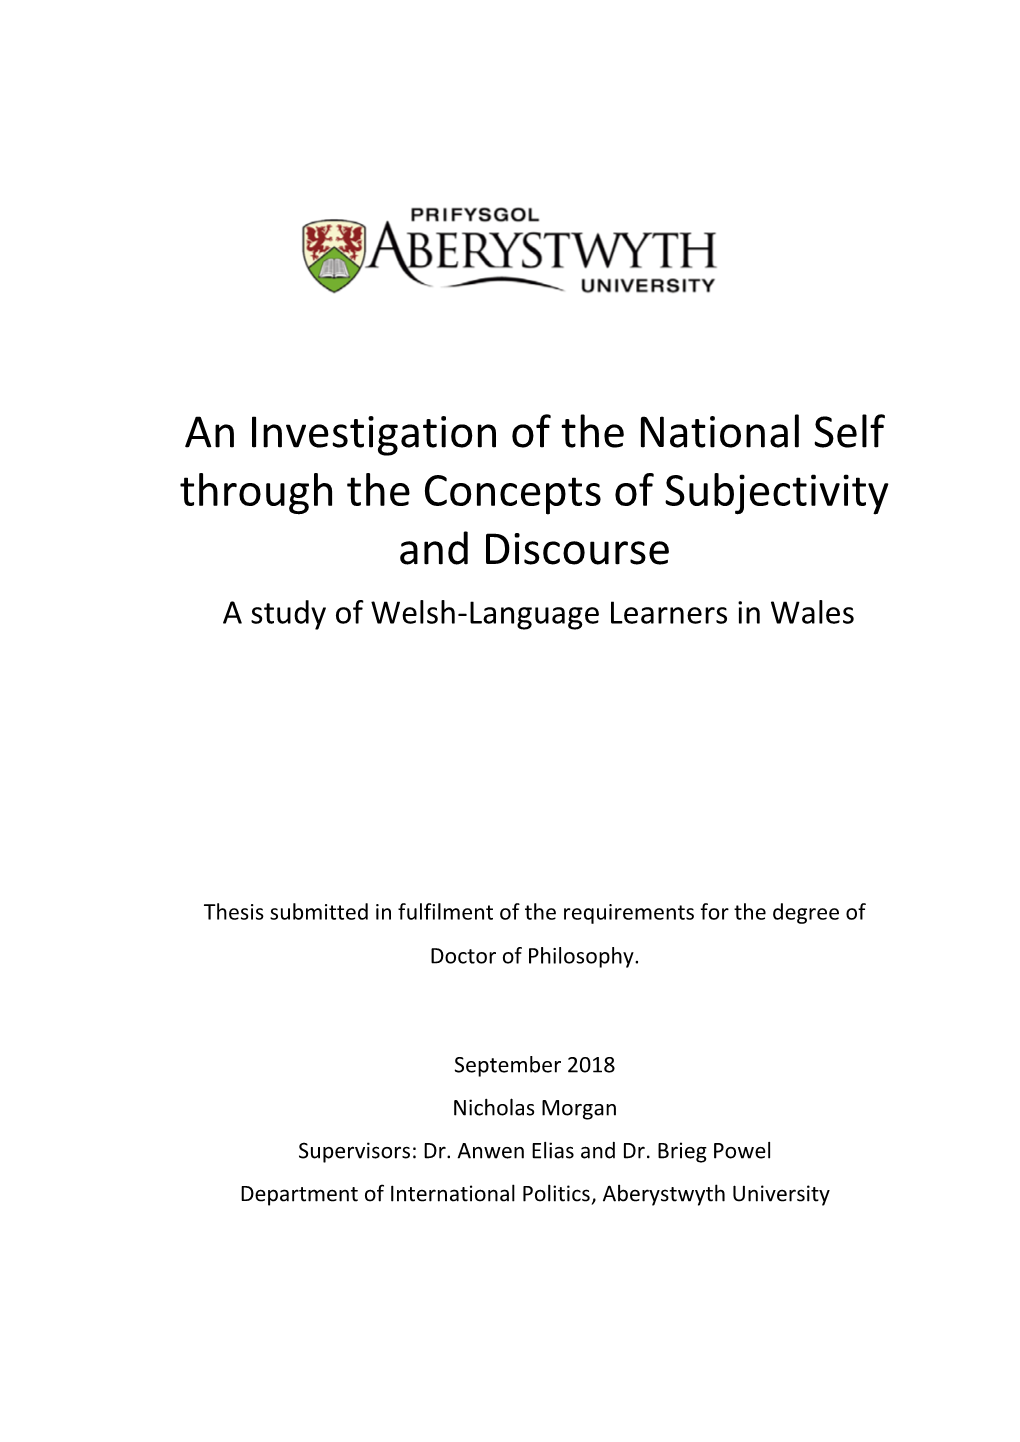 An Investigation of the National Self Through the Concepts of Subjectivity and Discourse a Study of Welsh-Language Learners in Wales